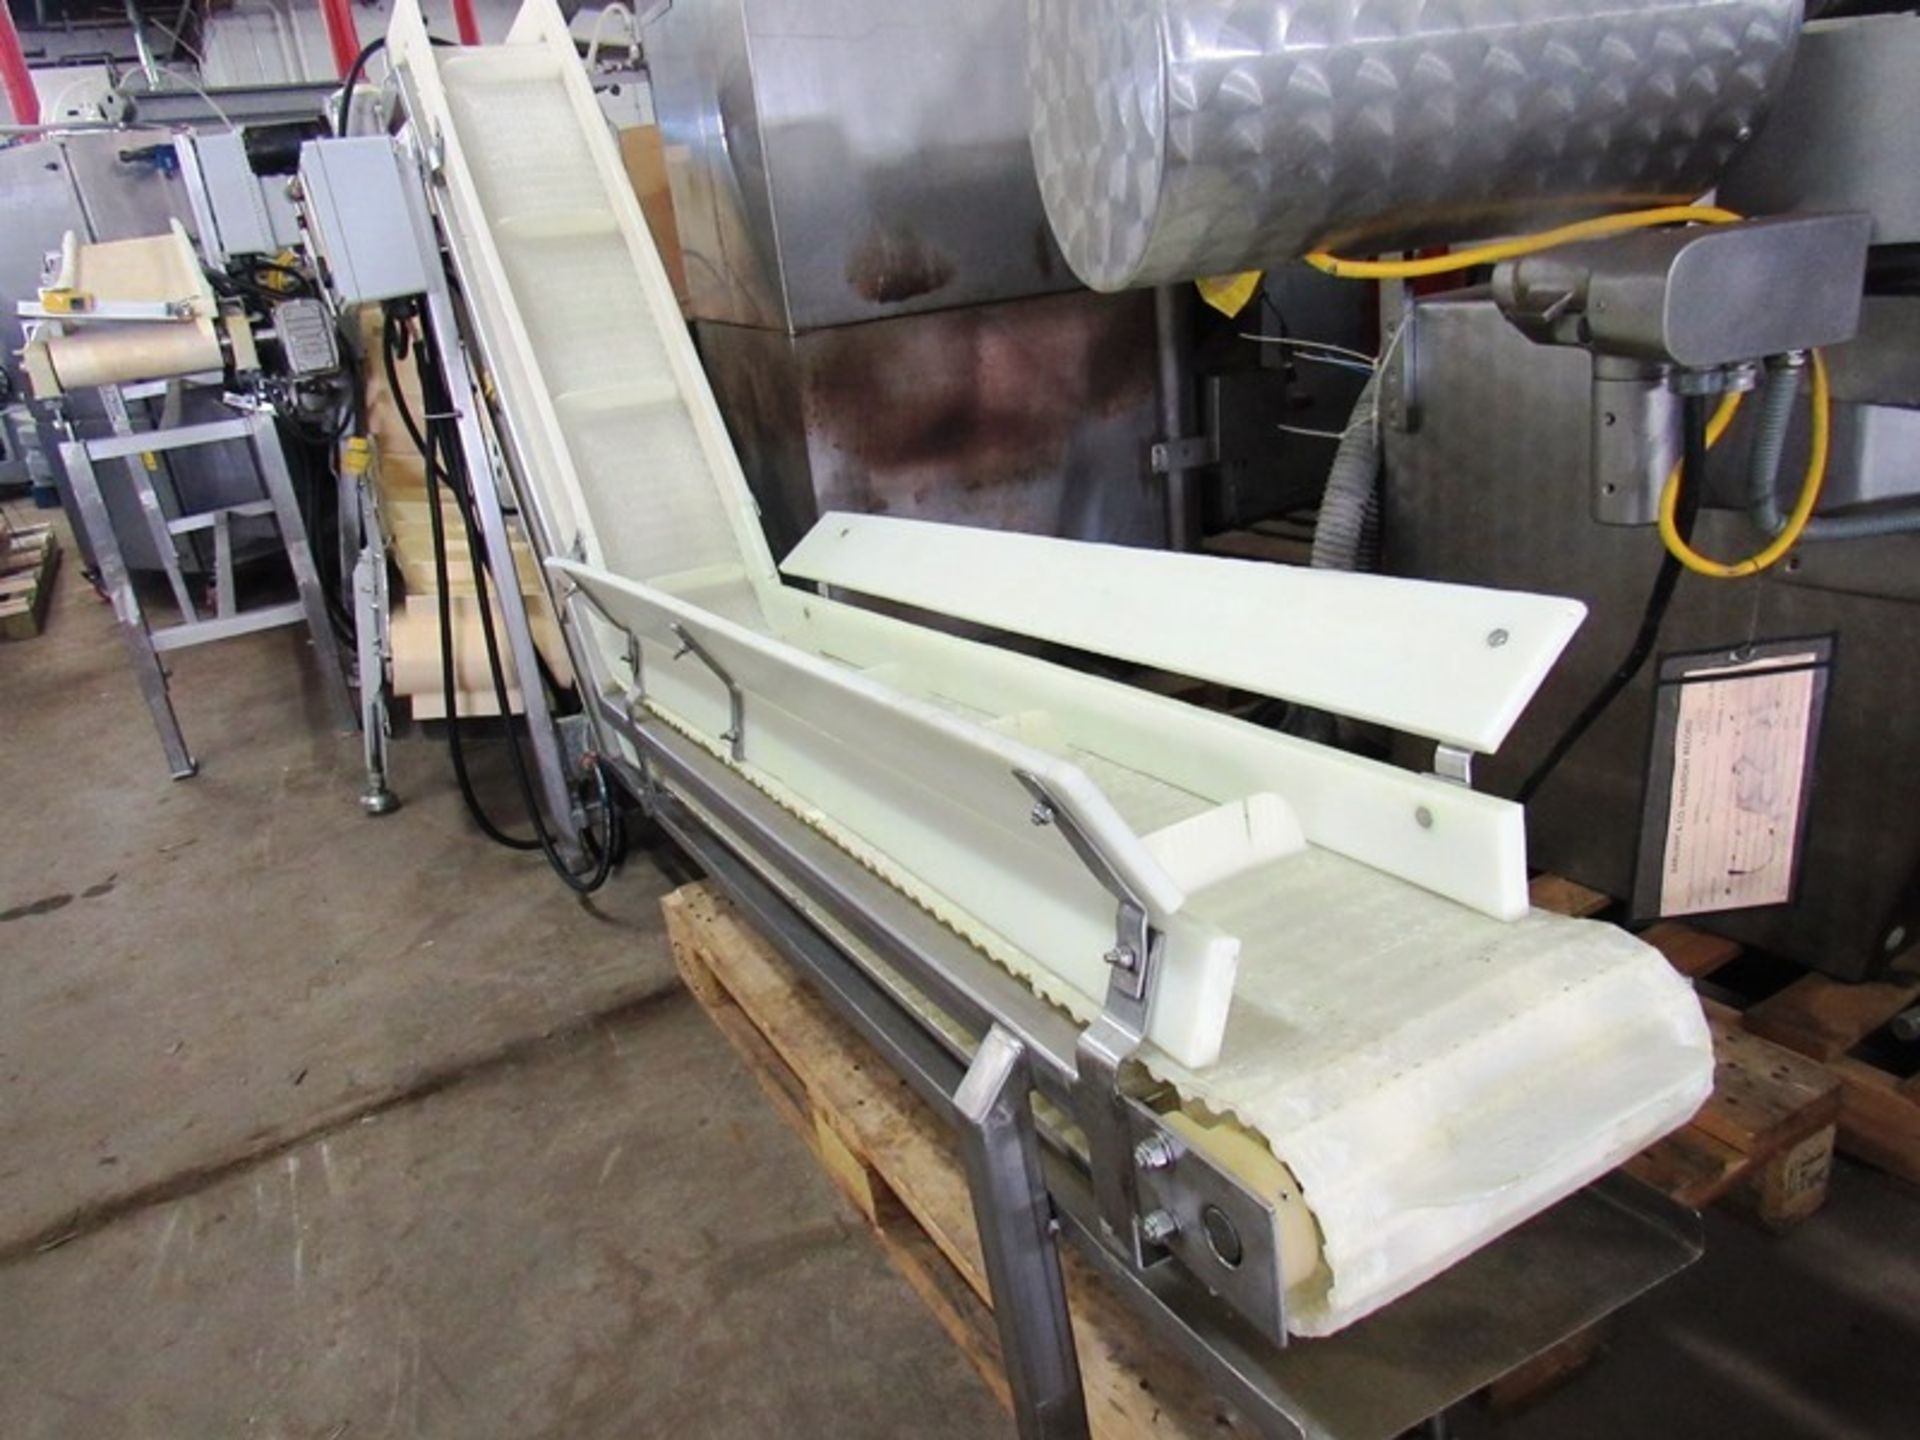 Stainless Steel Incline Conveyor, 10" W X 102" L flighted belt, 2" high flights spaced 12" apart, - Image 2 of 4